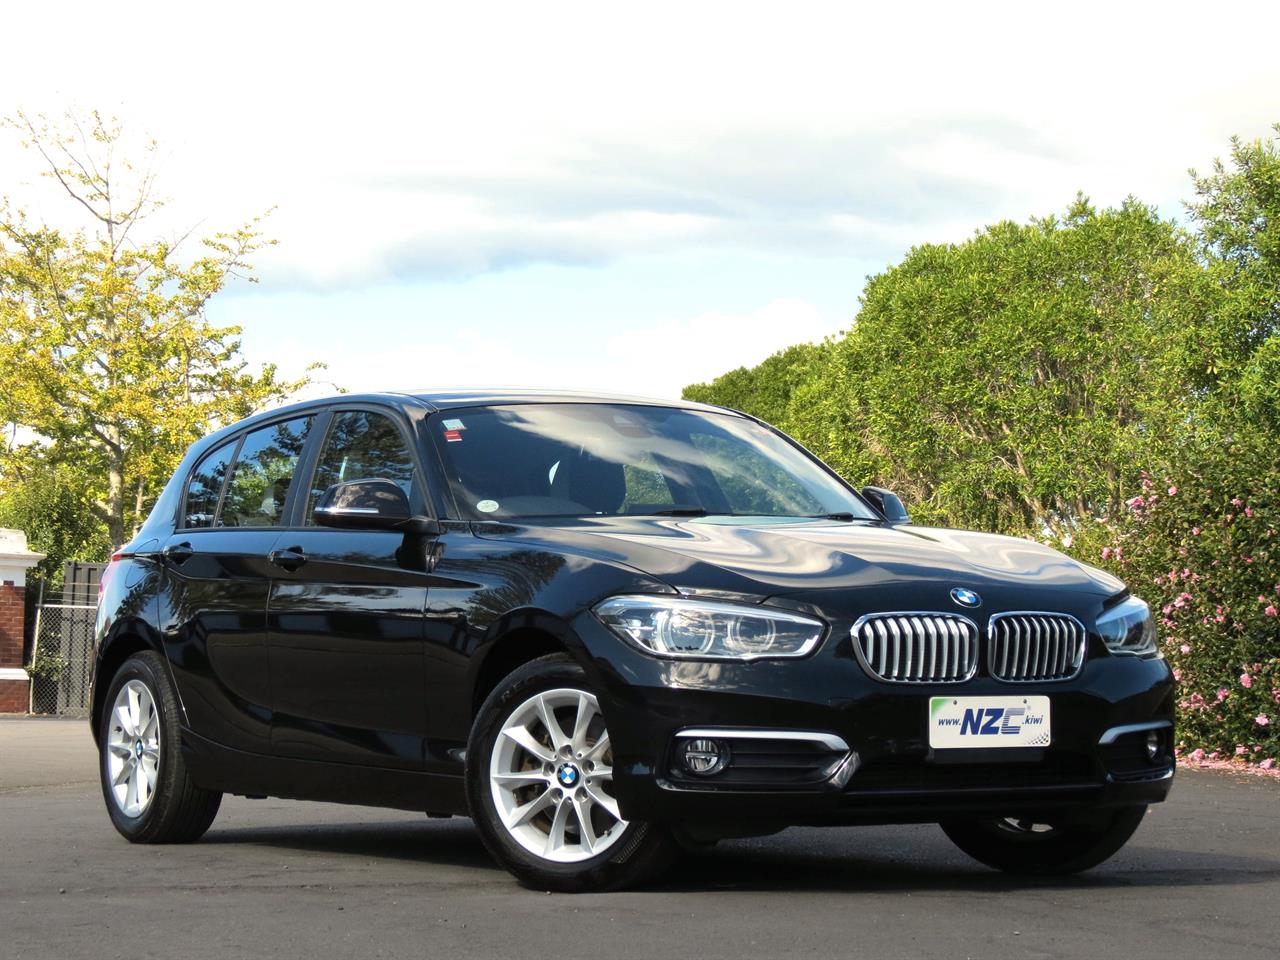 NZC 2016 BMW 118d just arrived to Auckland